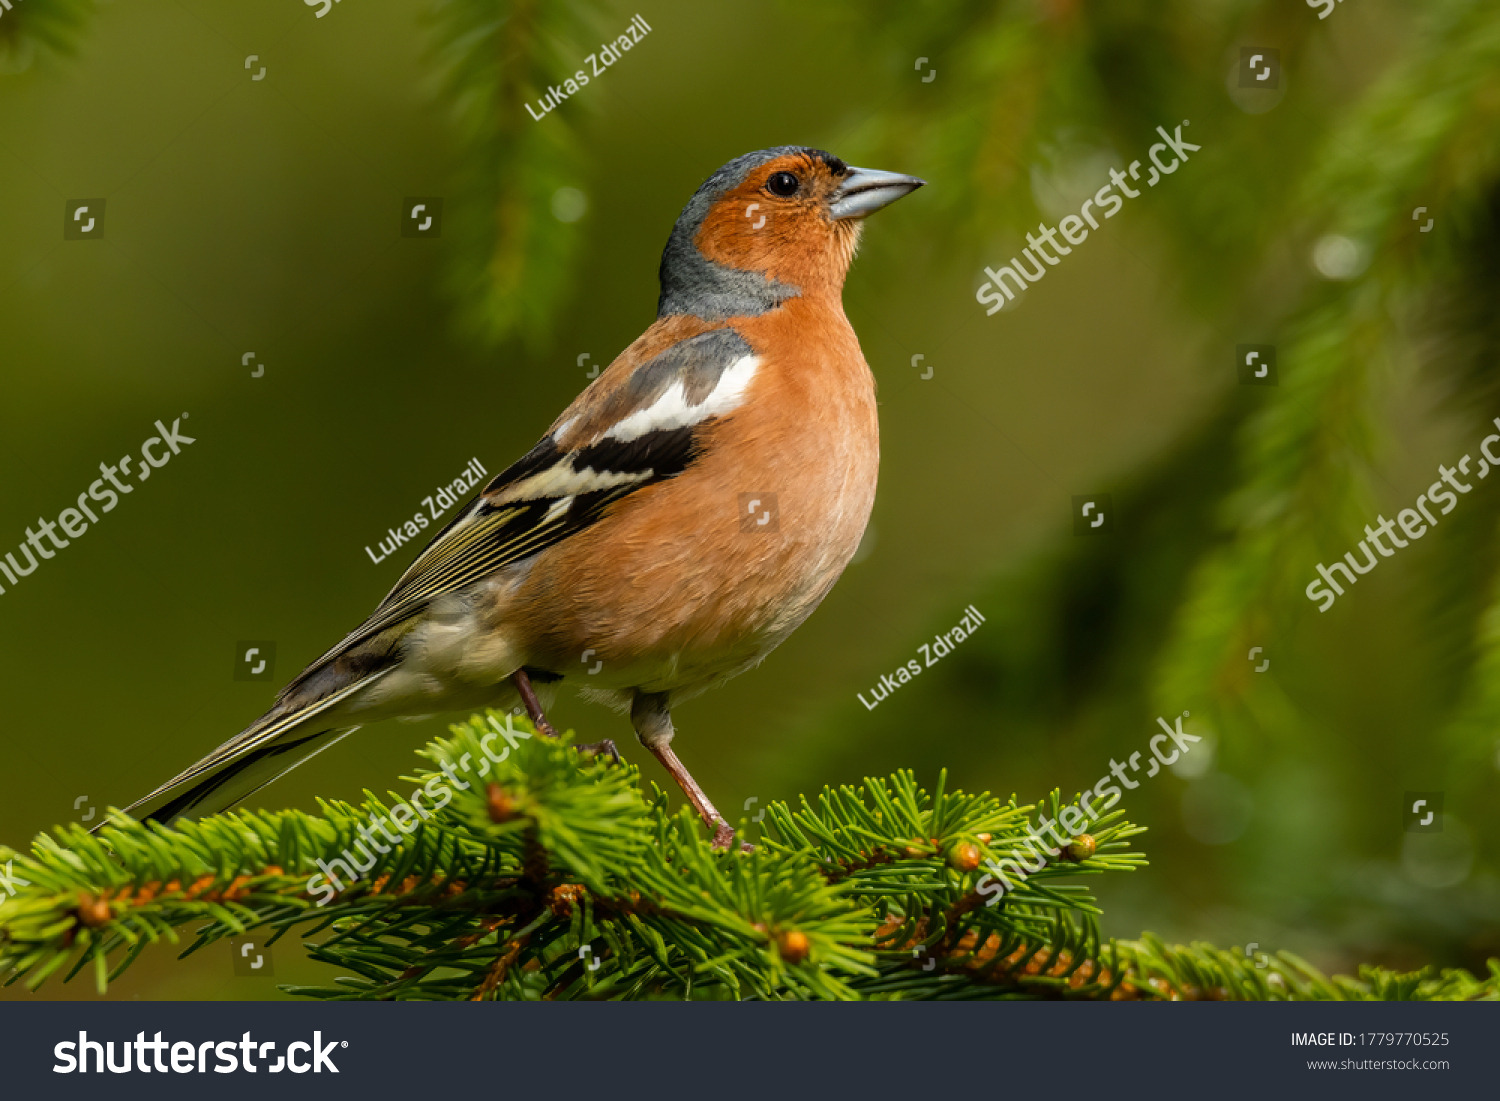 Common chaffinch (Fringilla coelebs) sitting on a pine branch in the forest. Detailed portrait of a beautiful orange songbird with soft green background. Wildlife scene from nature. Czech Republic #1779770525